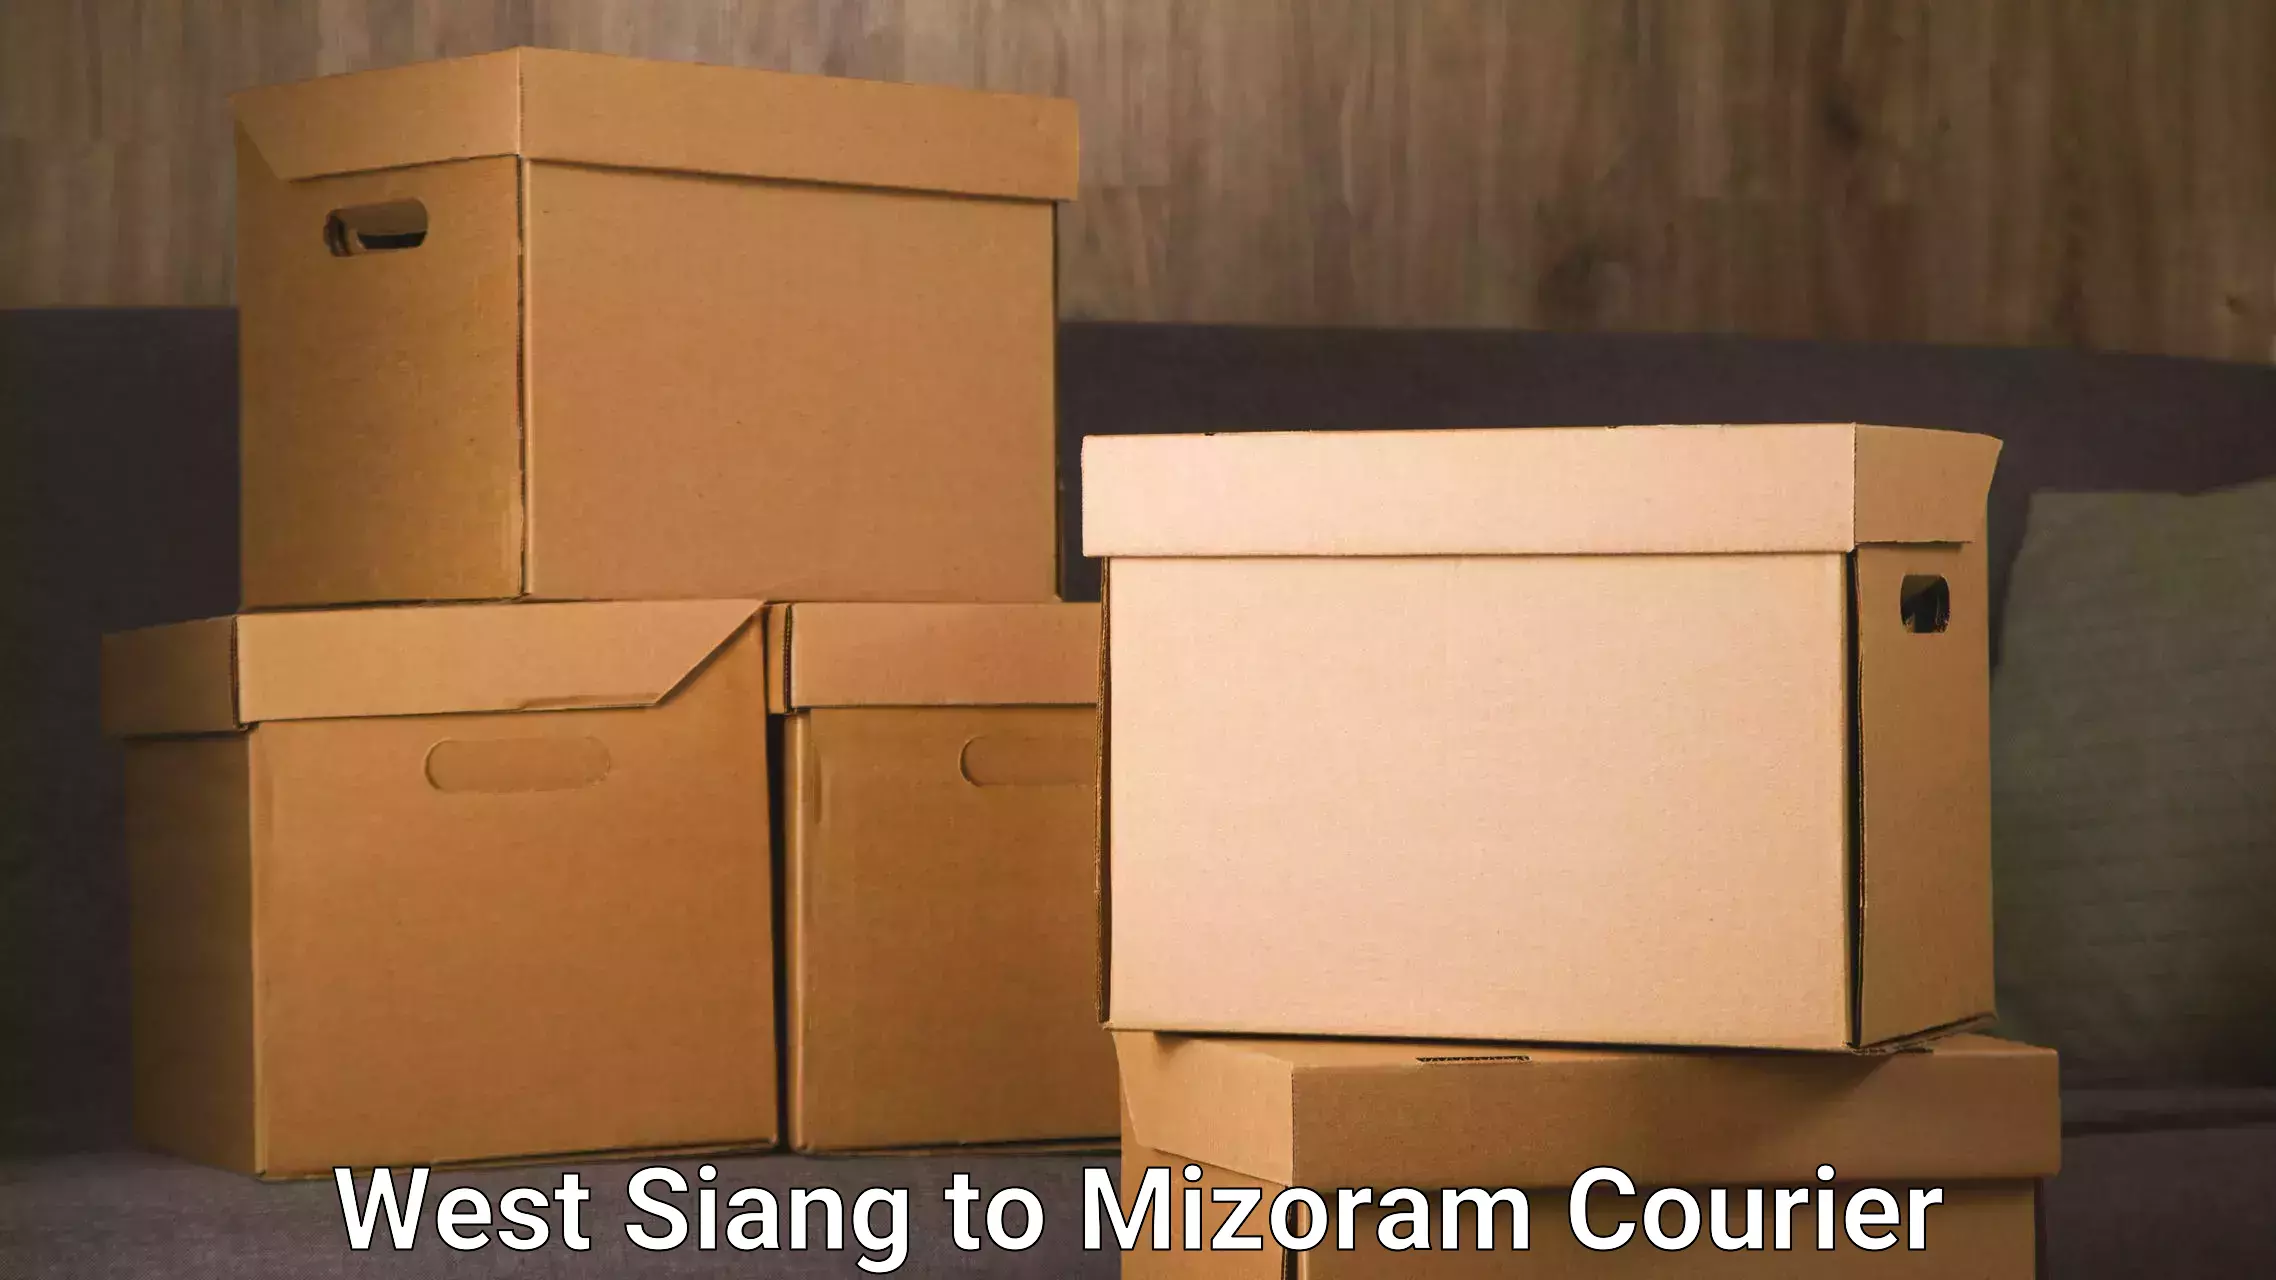 Speedy delivery service West Siang to Mizoram